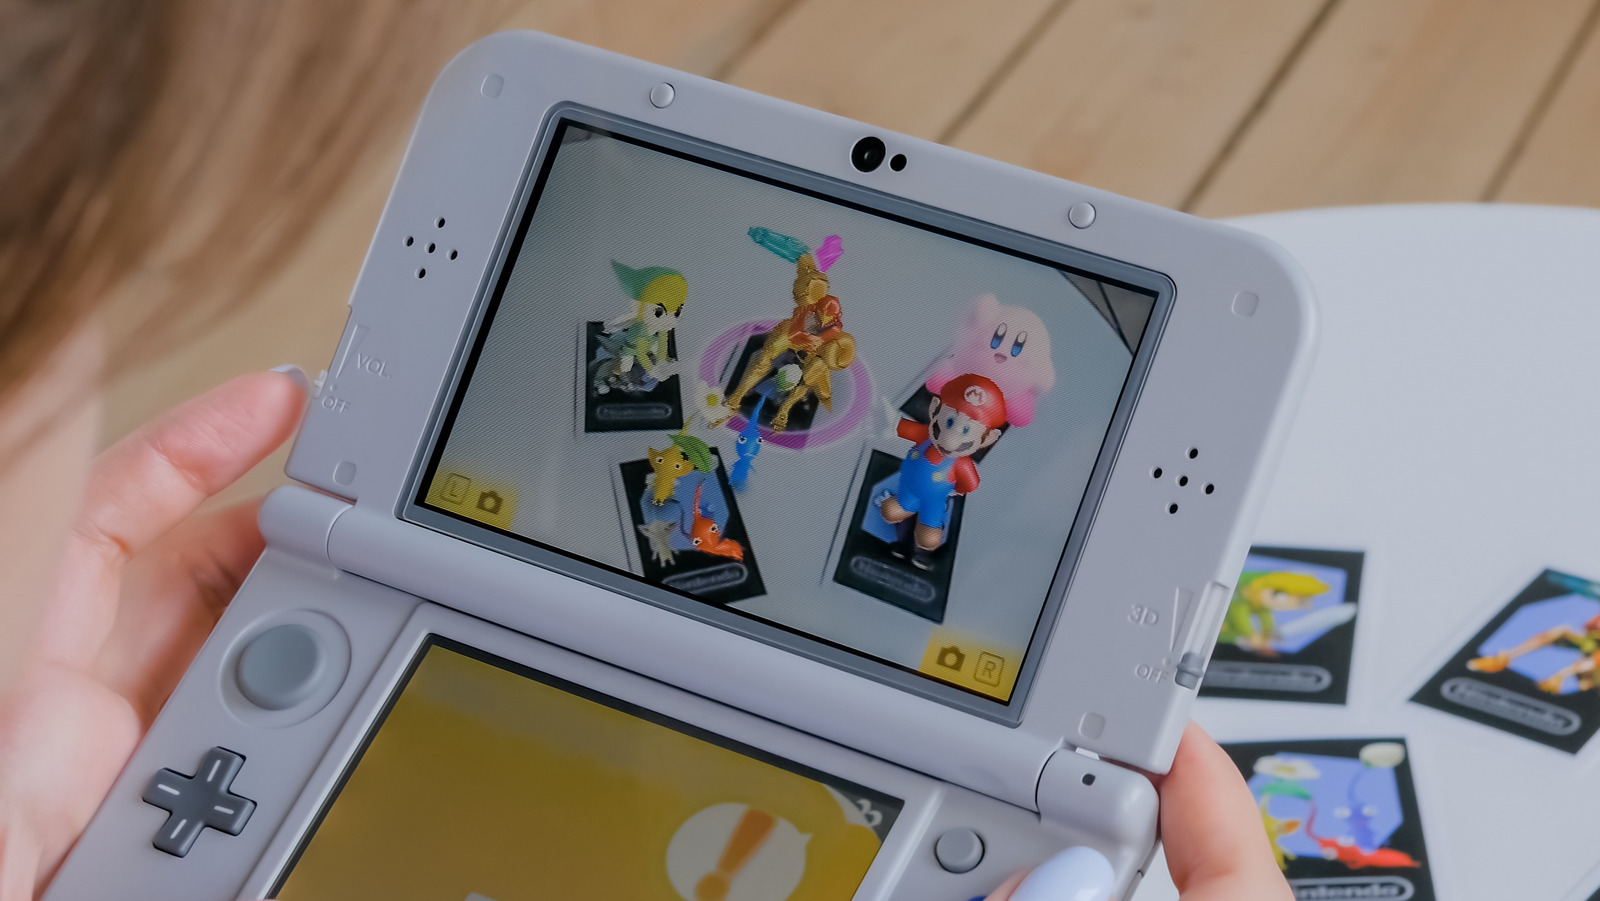 Nintendo 3DS and Wii U eShops are shutting down — so buy games